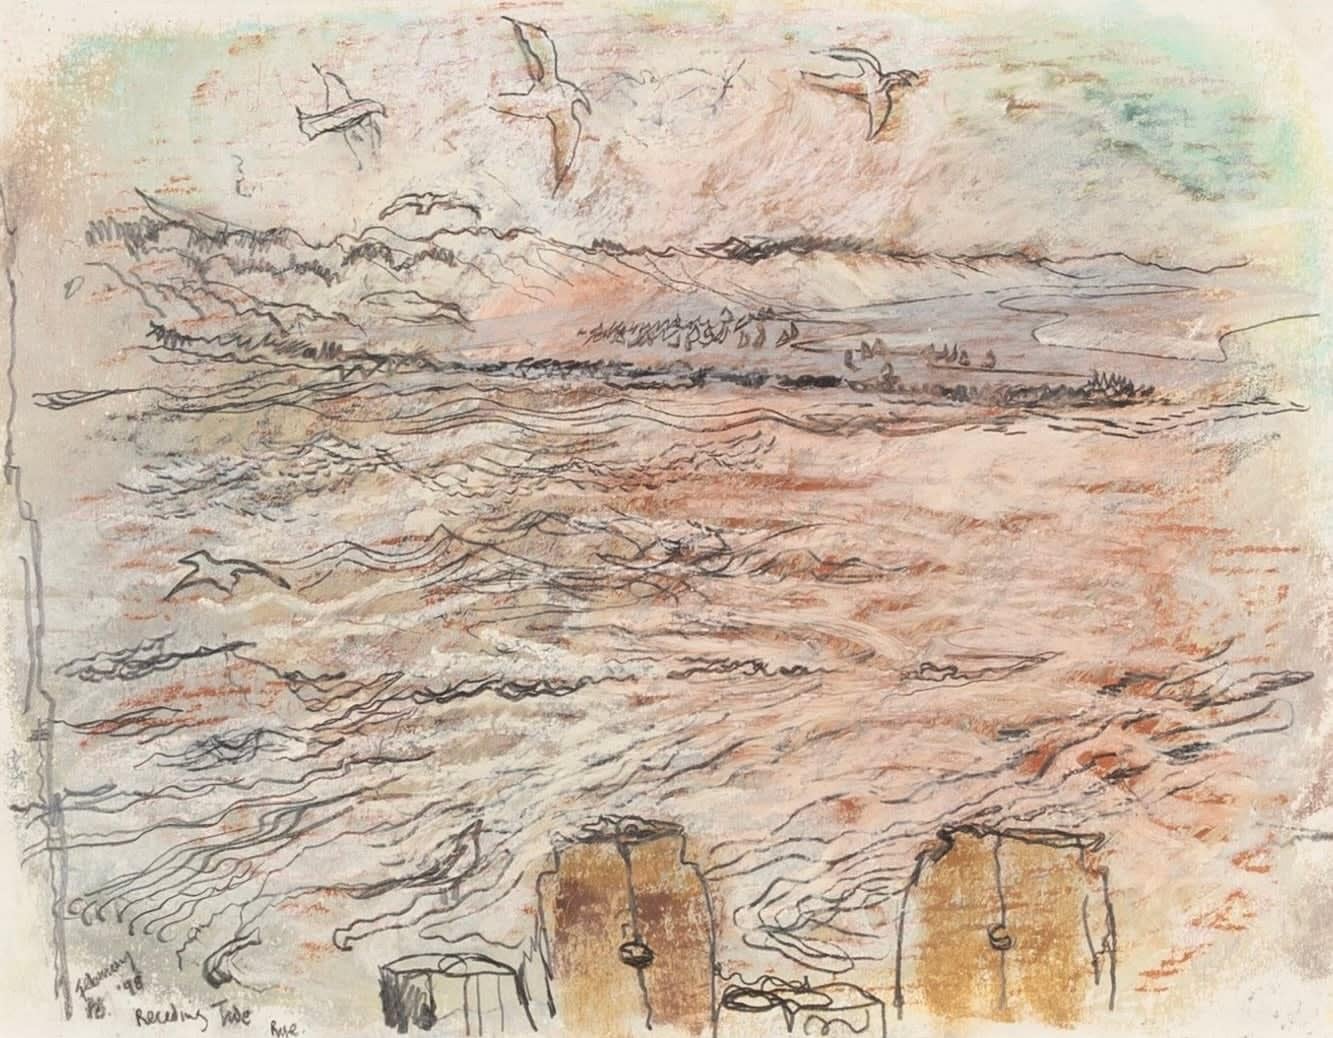 Receding Tide (Deal, Kent), Oil Pastel Painting by Pamela Burns B. 1938, 1998

Additional information:
Medium: Oil pastel with pencil
Dimensions: 25 x 31 cm
9 7/8 x 12 1/4 in
Signed, dated, and titled; further inscribed verso

Pamela Burns is a